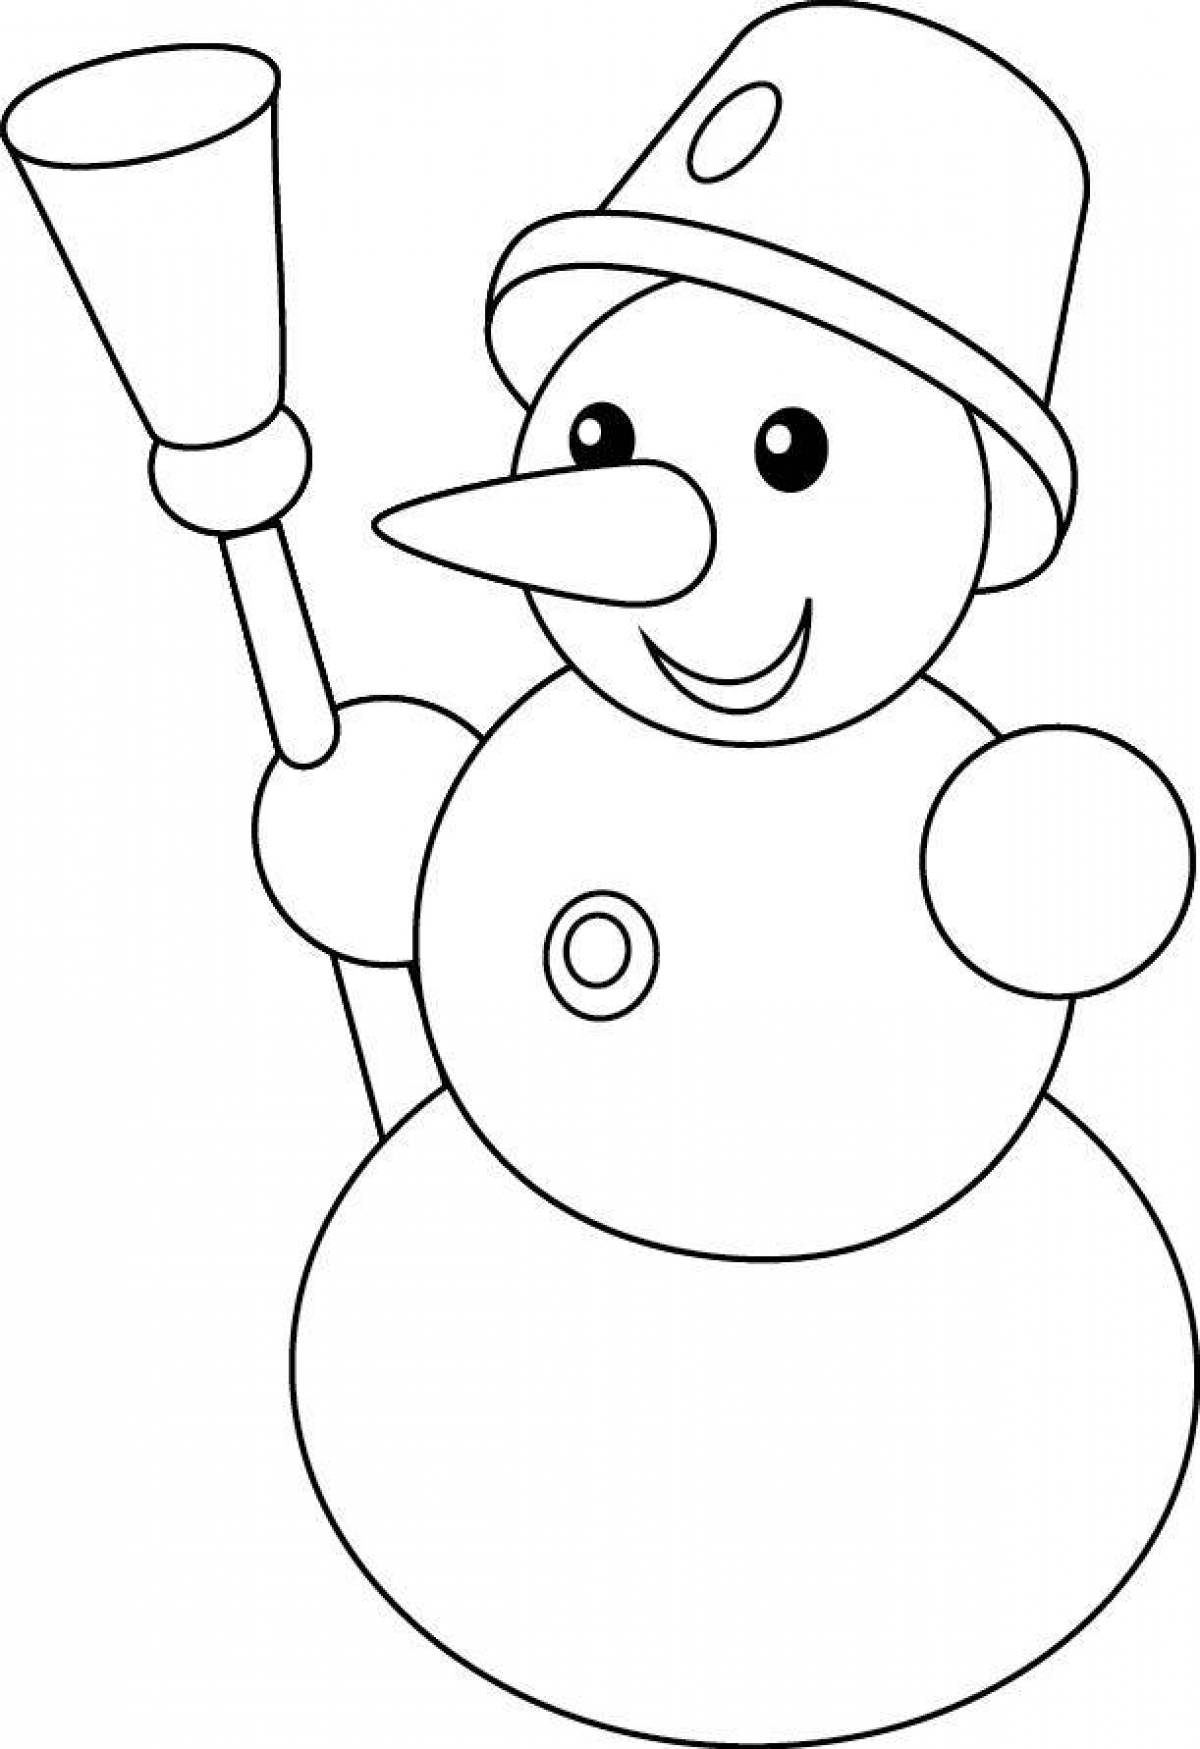 A funny snowman coloring book for kids 6-7 years old